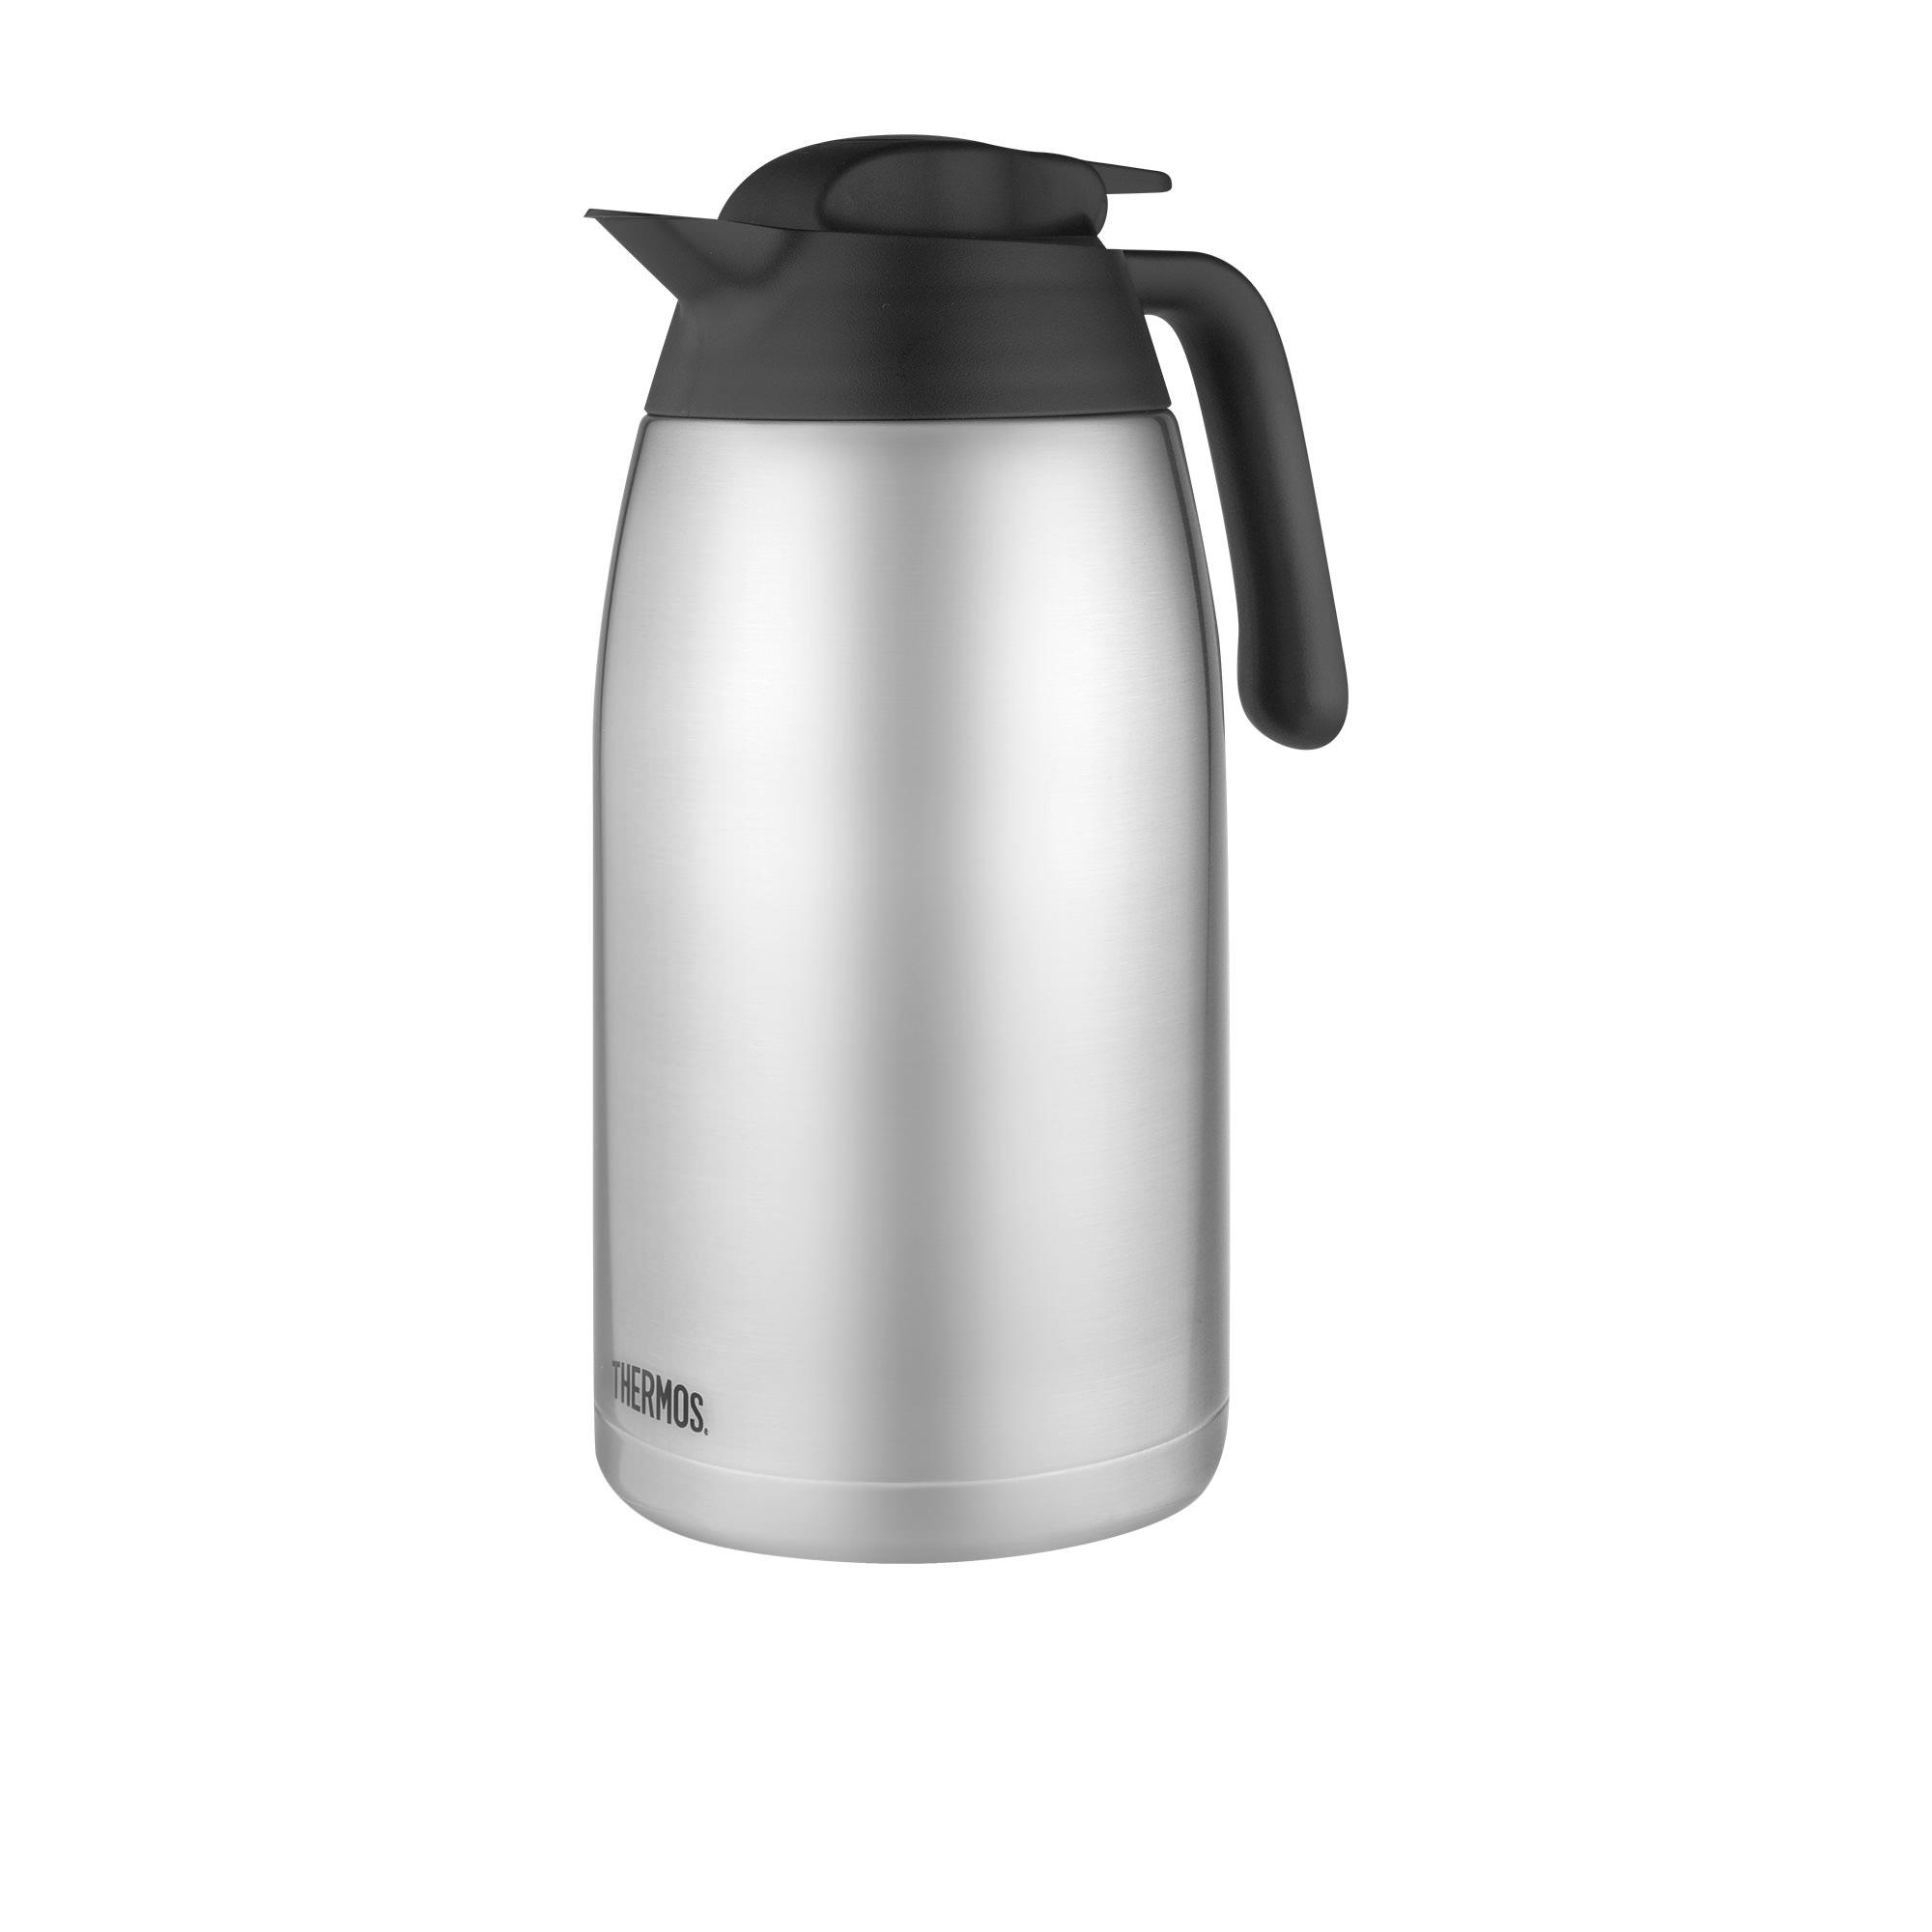 Thermos Insulated Carafe 2L Stainless Steel Image 1